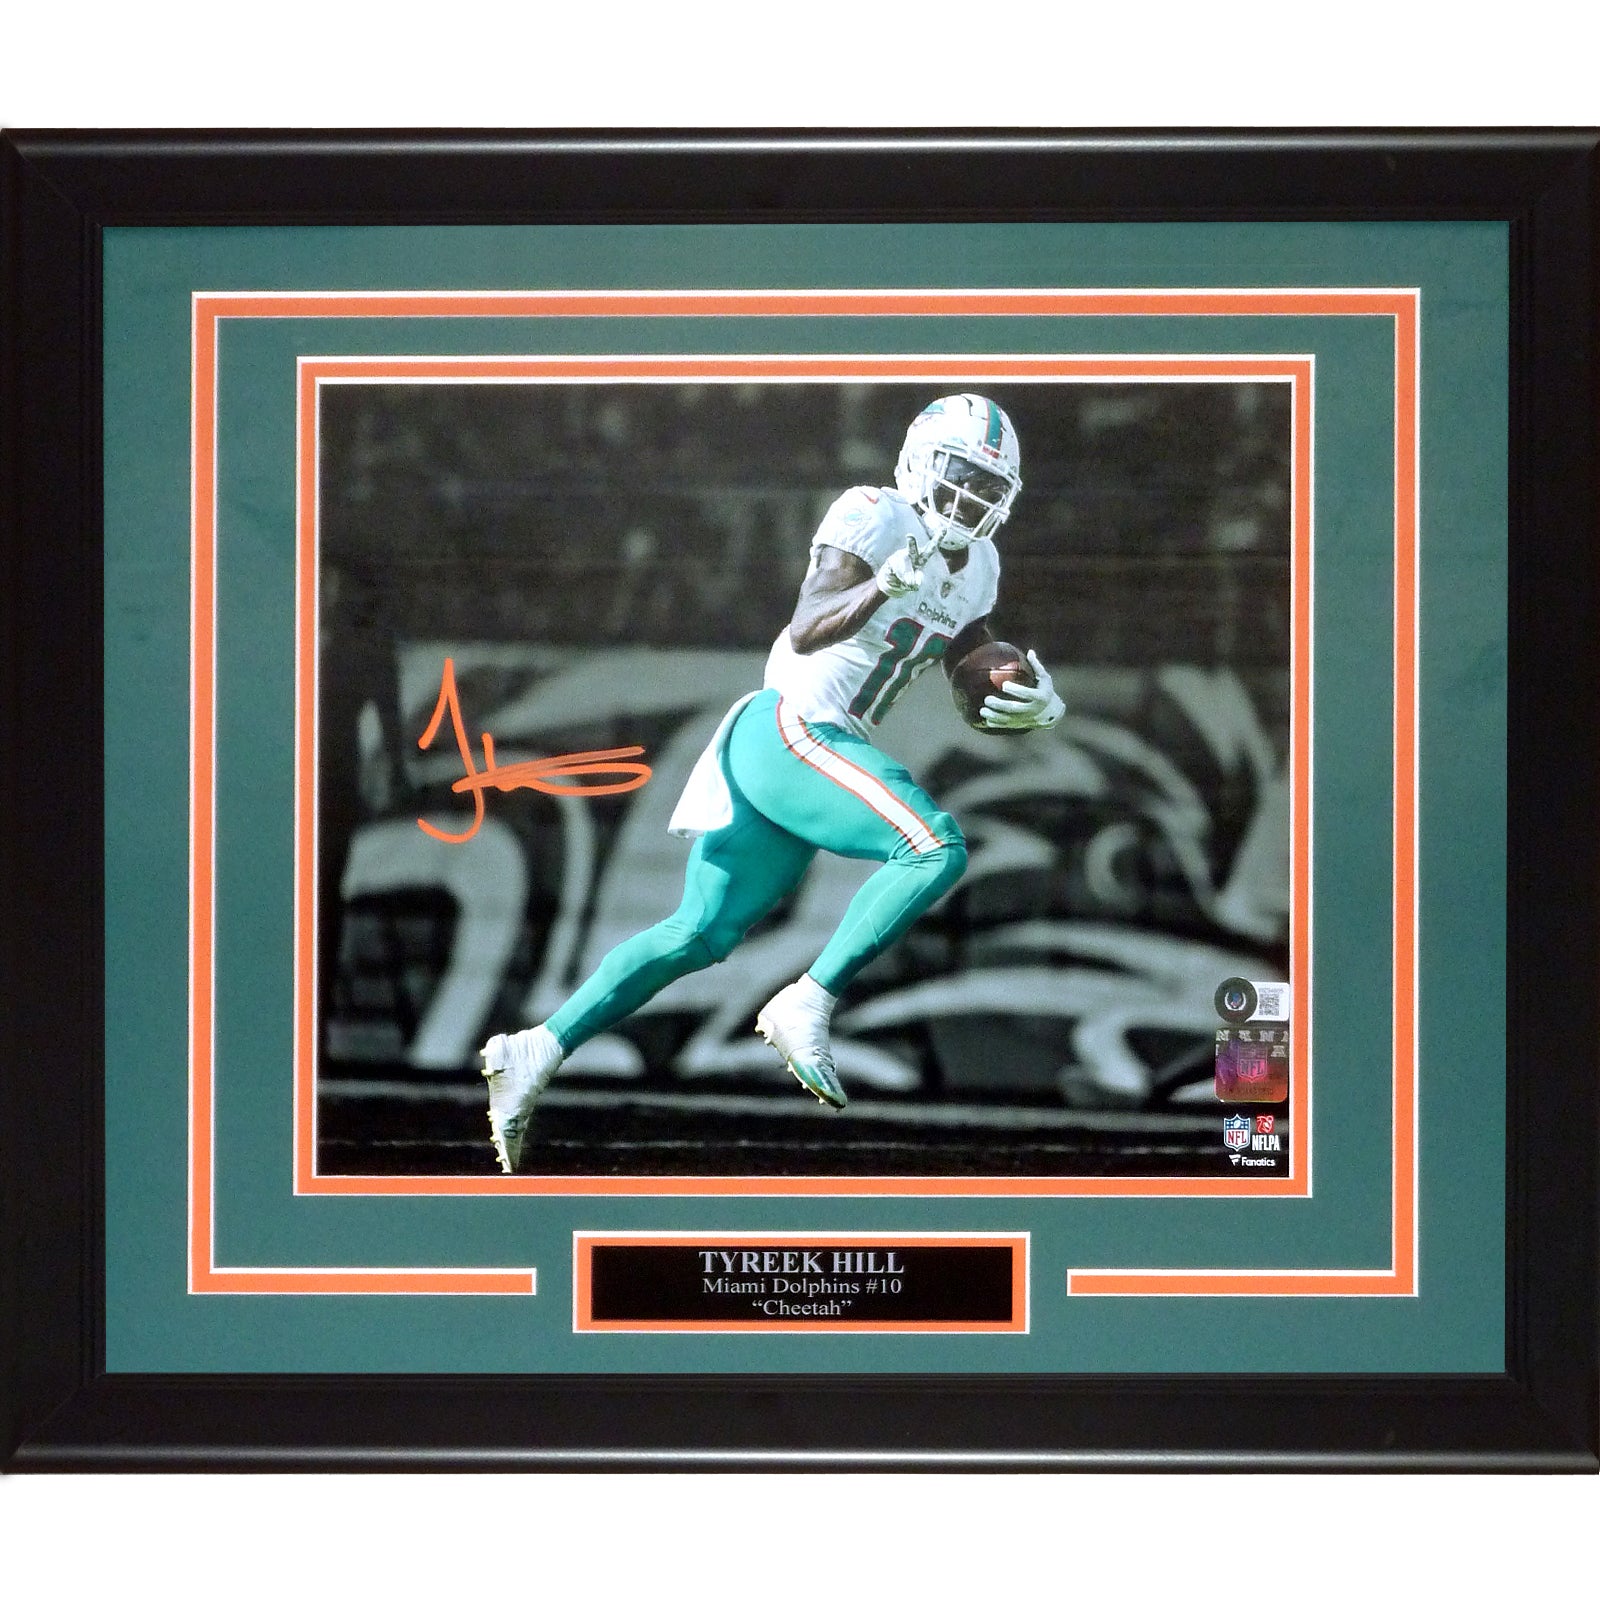 Tyreek Hill Autographed Miami Dolphins (Spotlight Peace Sign) Deluxe 11x14 Photo - Beckett